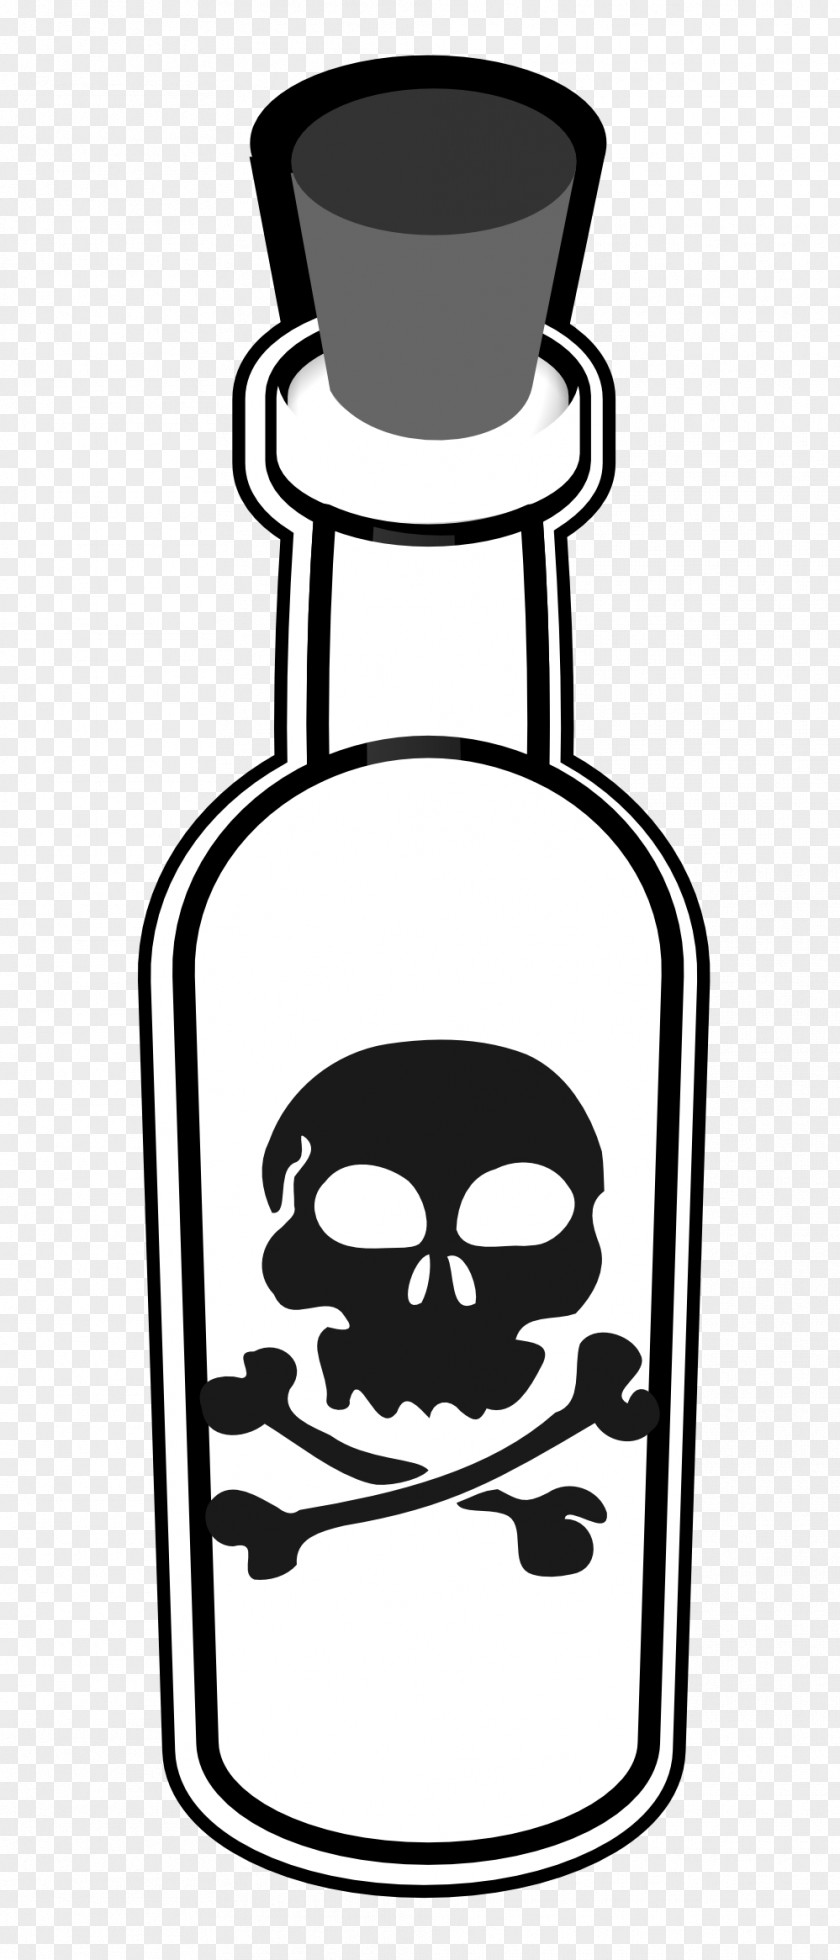 Poison Pictures Poisoning Free Content Clip Art PNG